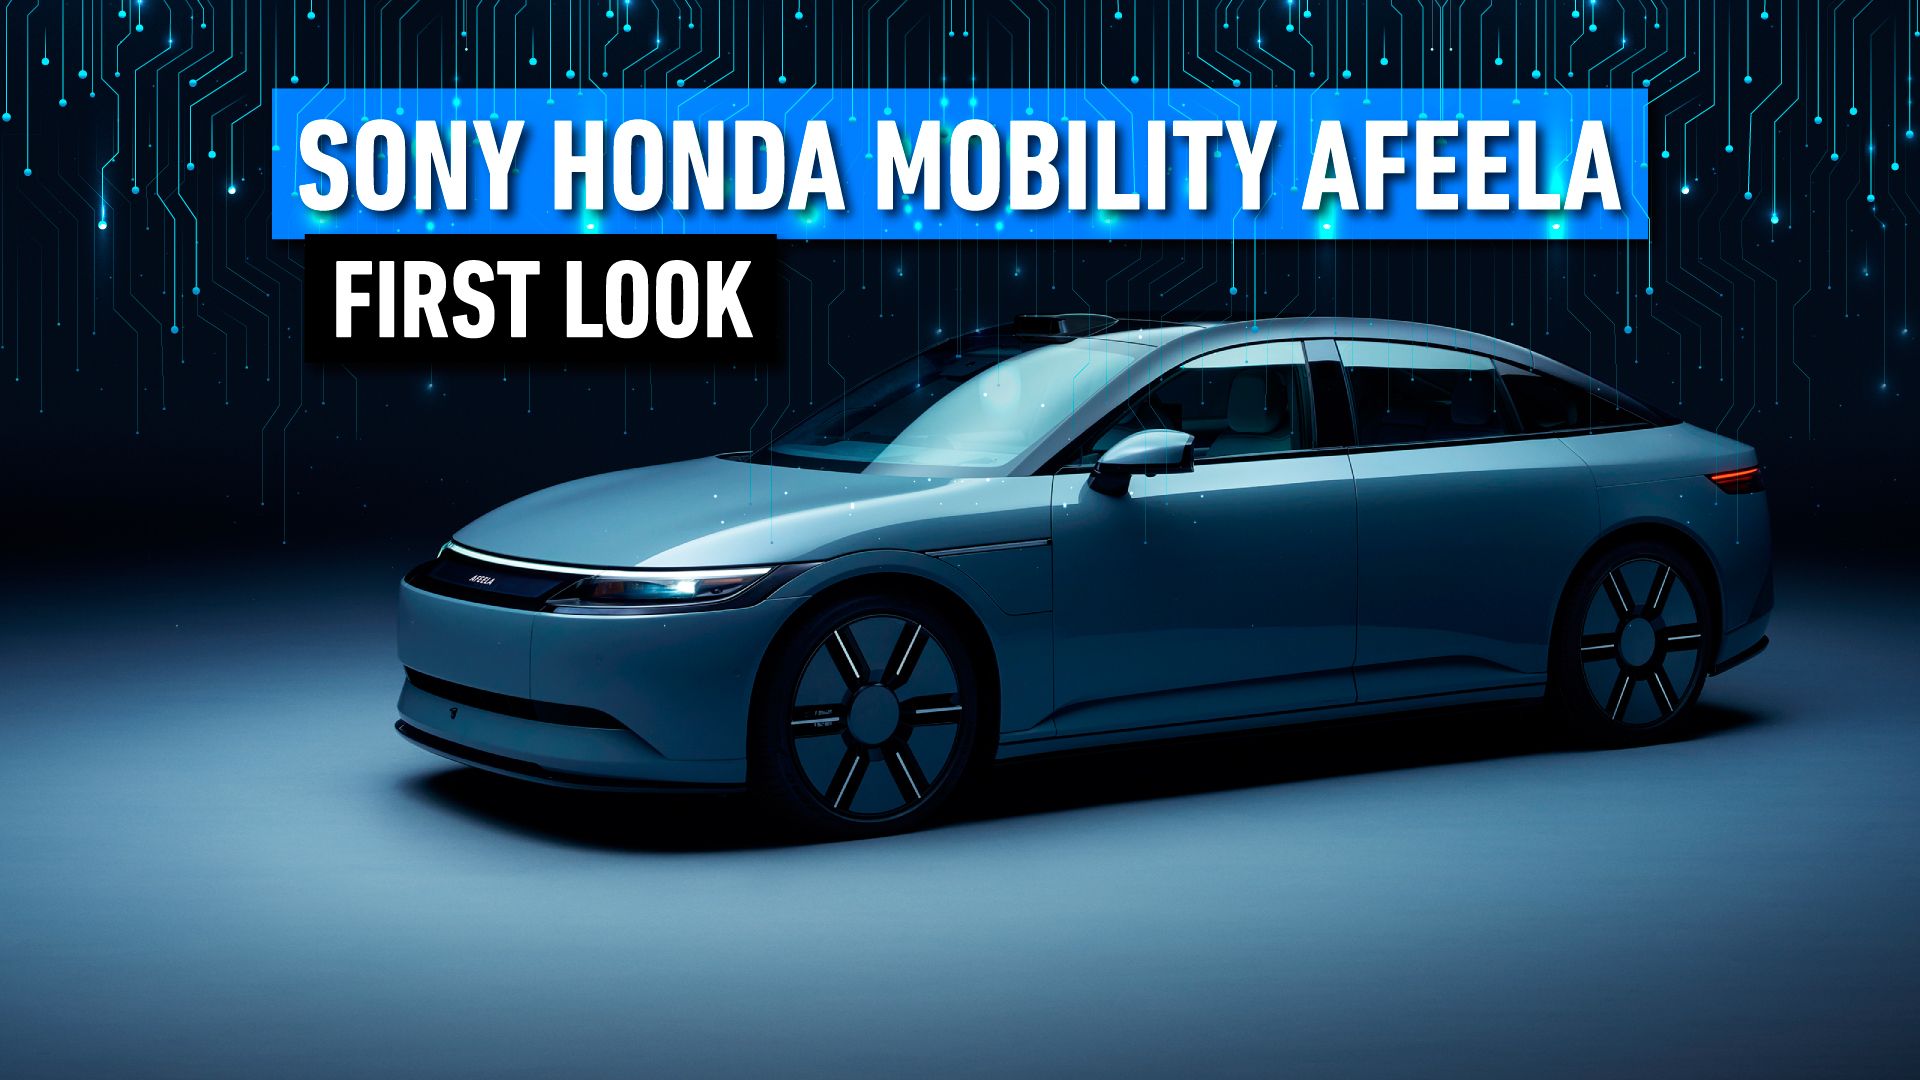 Sony-Honda-Mobility-Afeela-First-Look